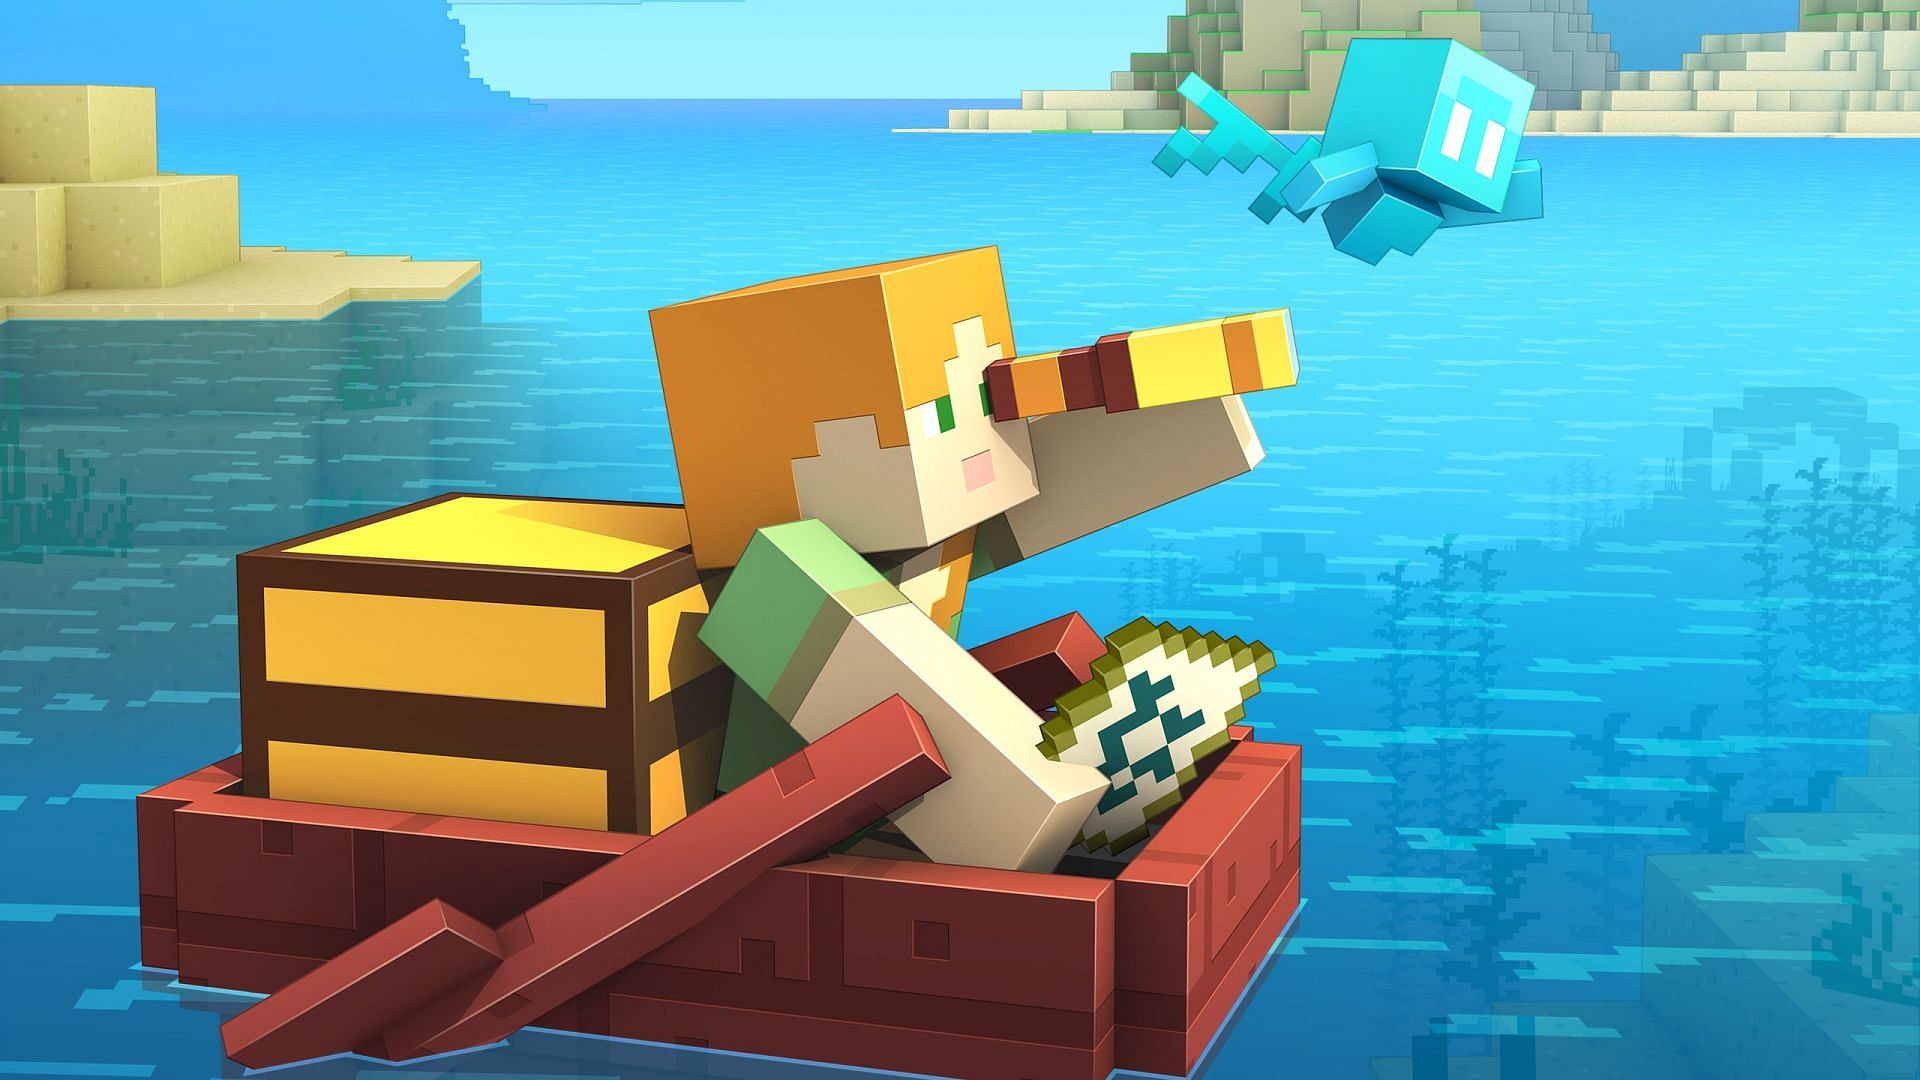 Alex was the second character introduced for the game (Image via Mojang Studios)